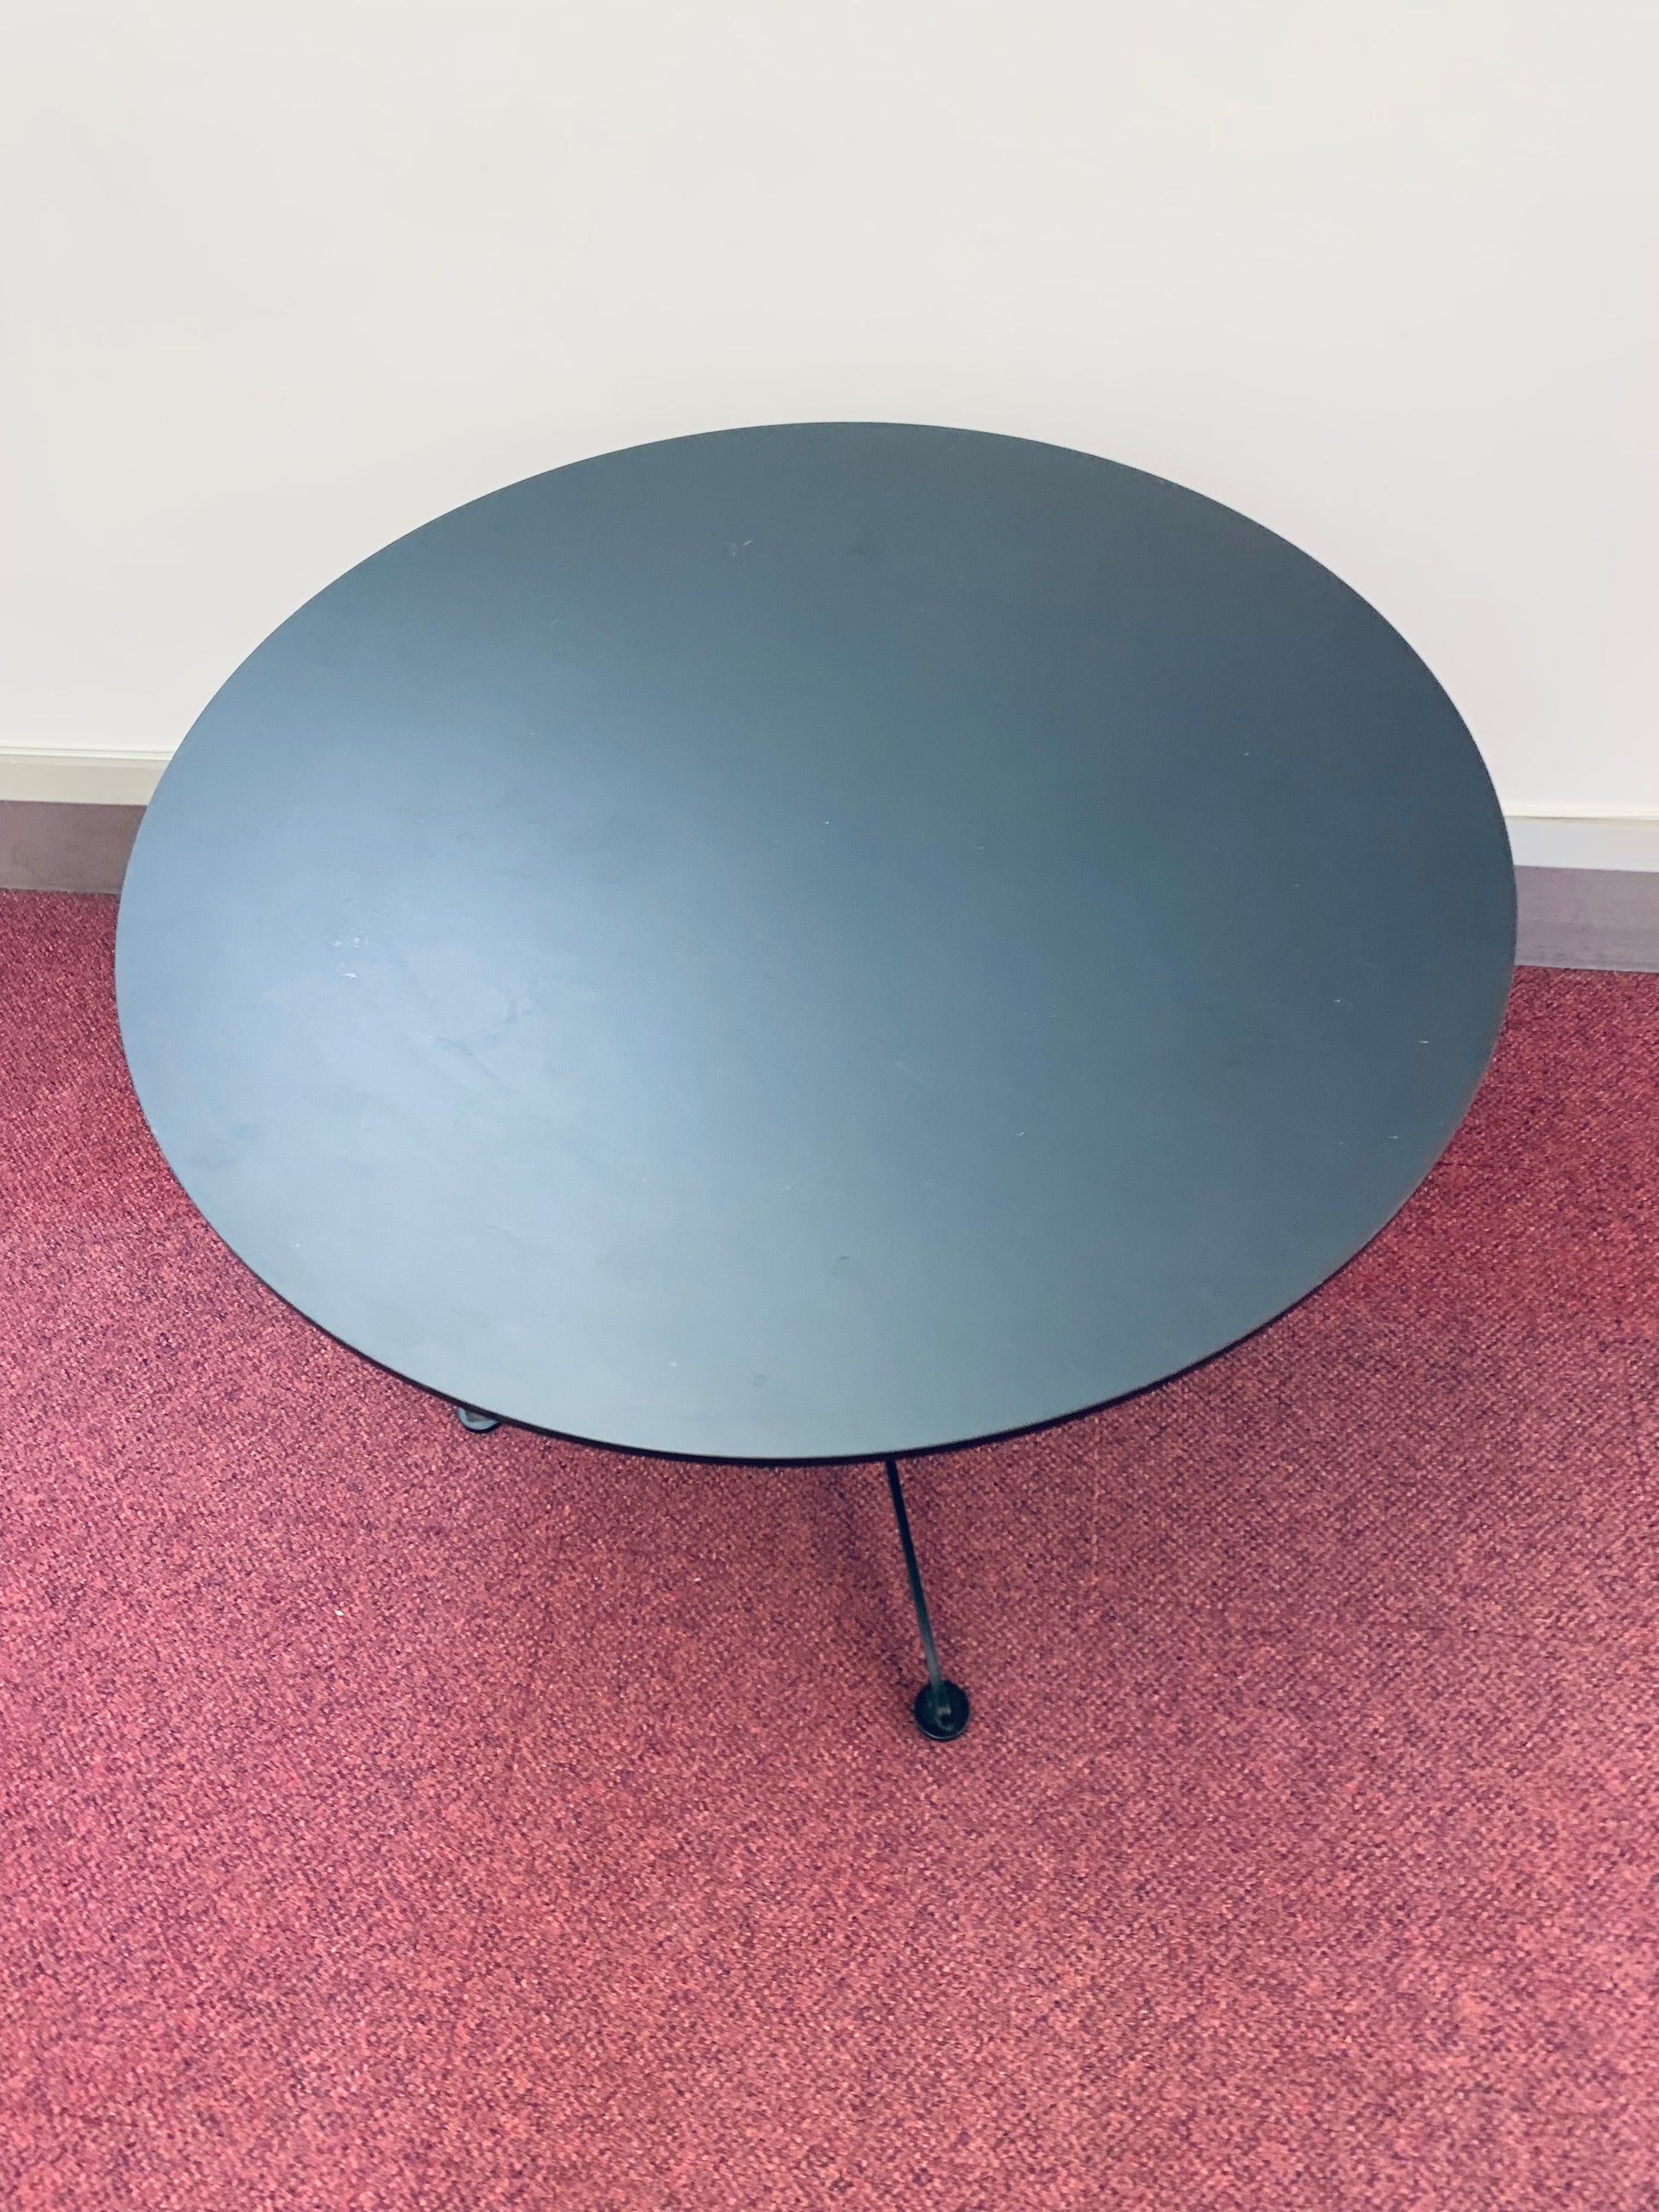 Table top of black round office table